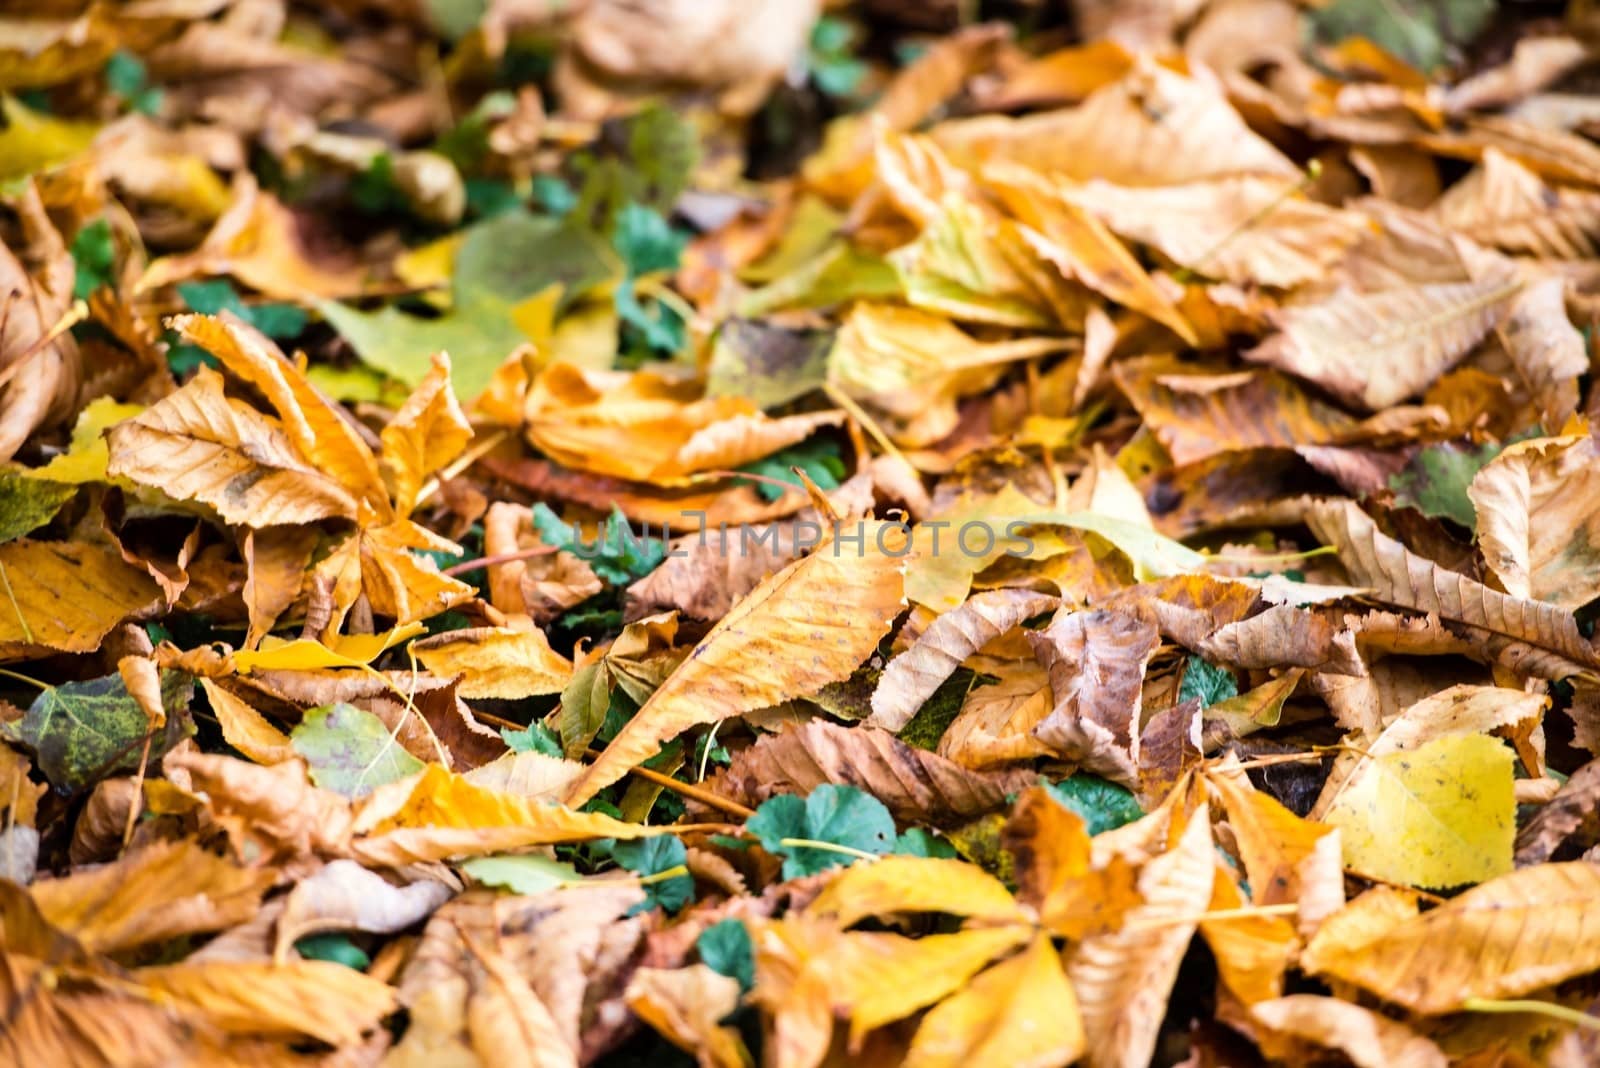 Colorful and bright background made of fallen autumn leaves, mainly chestnuts